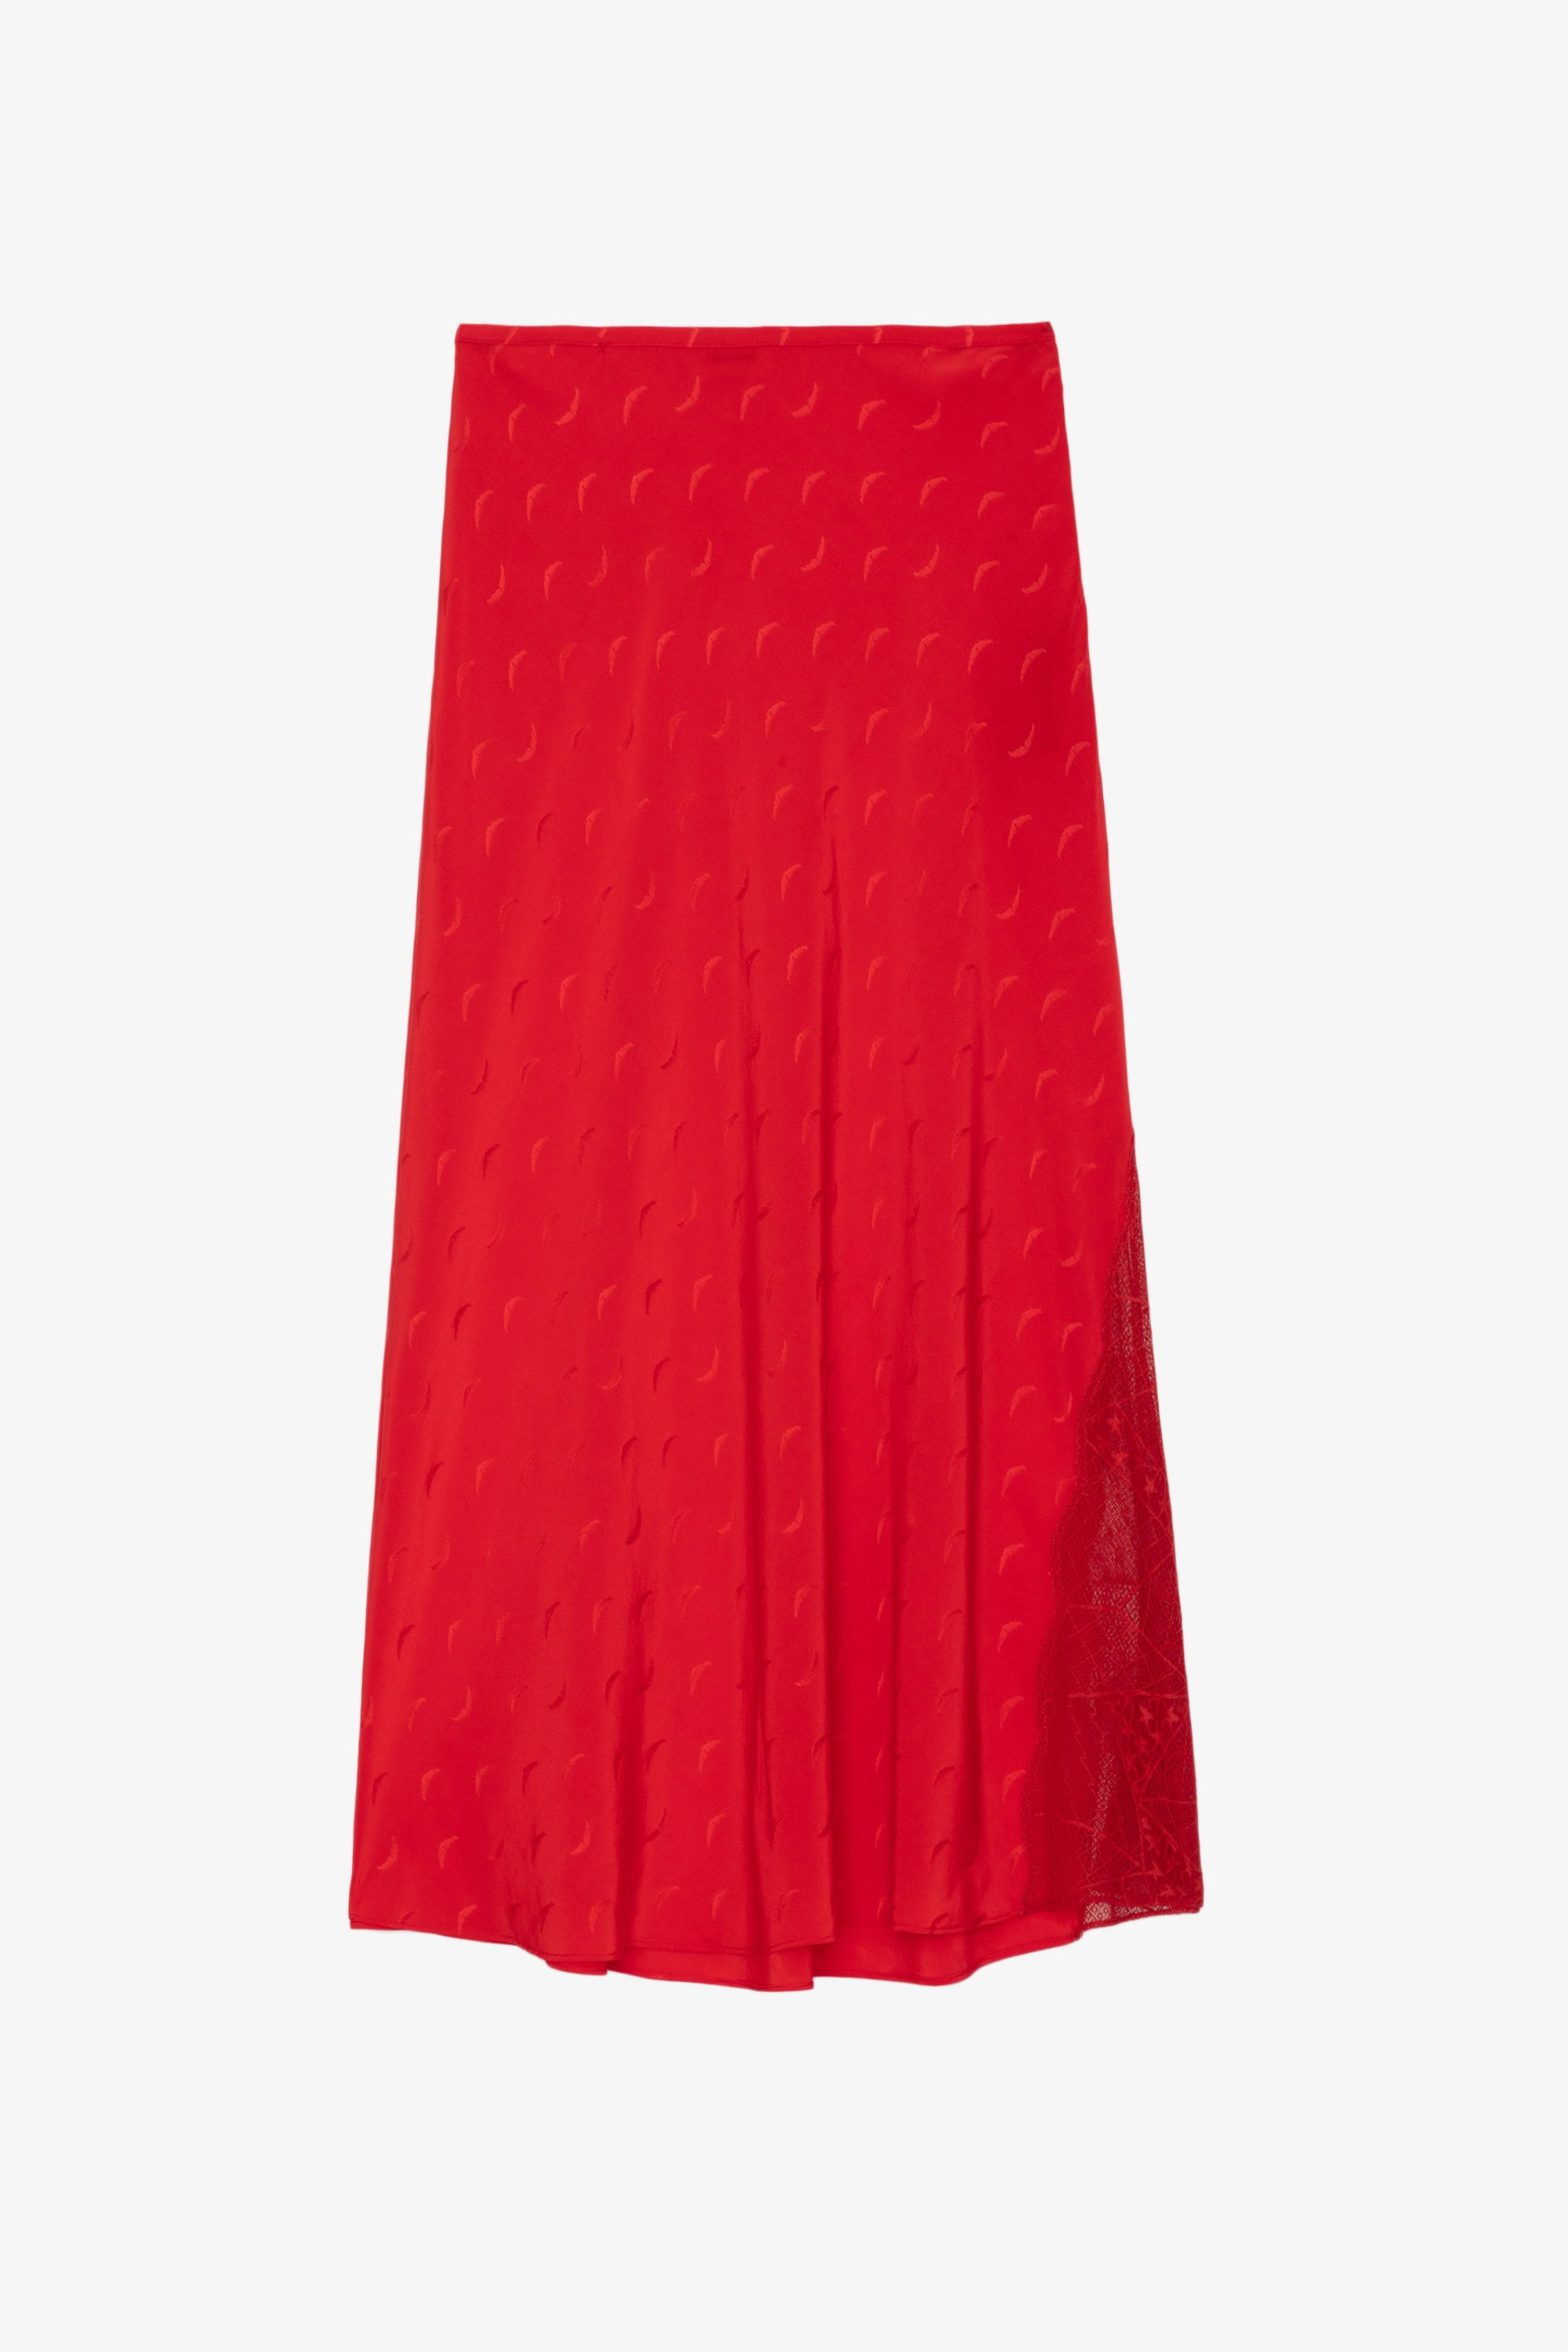 Jayla Skirt - Women’s red silk midi skirt with zip fastening, all over wing pattern, and side slit with lace detail.